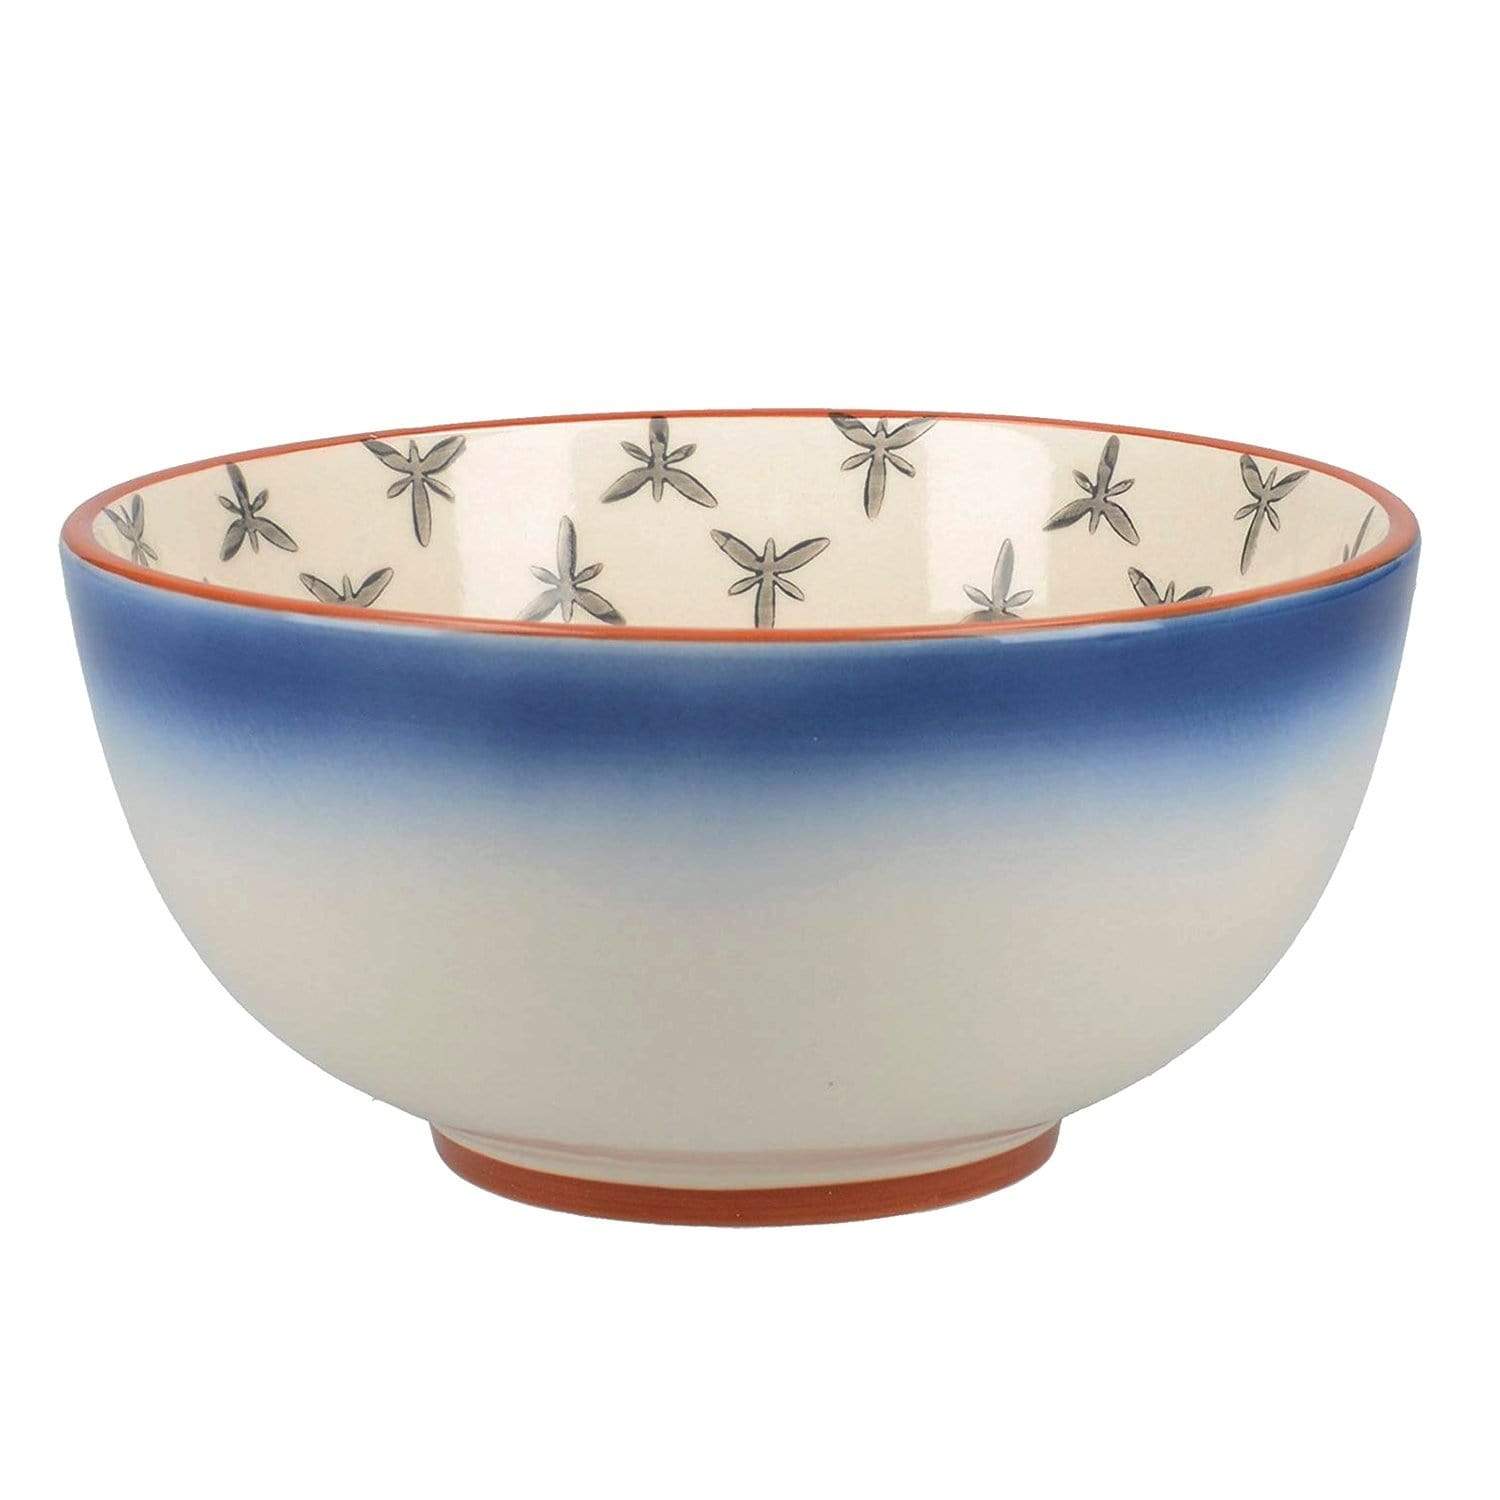 Creative Tops Mikasa Drift Ombre Cereal Bowl - Blue and White, 15 cm - 5201624 - Jashanmal Home